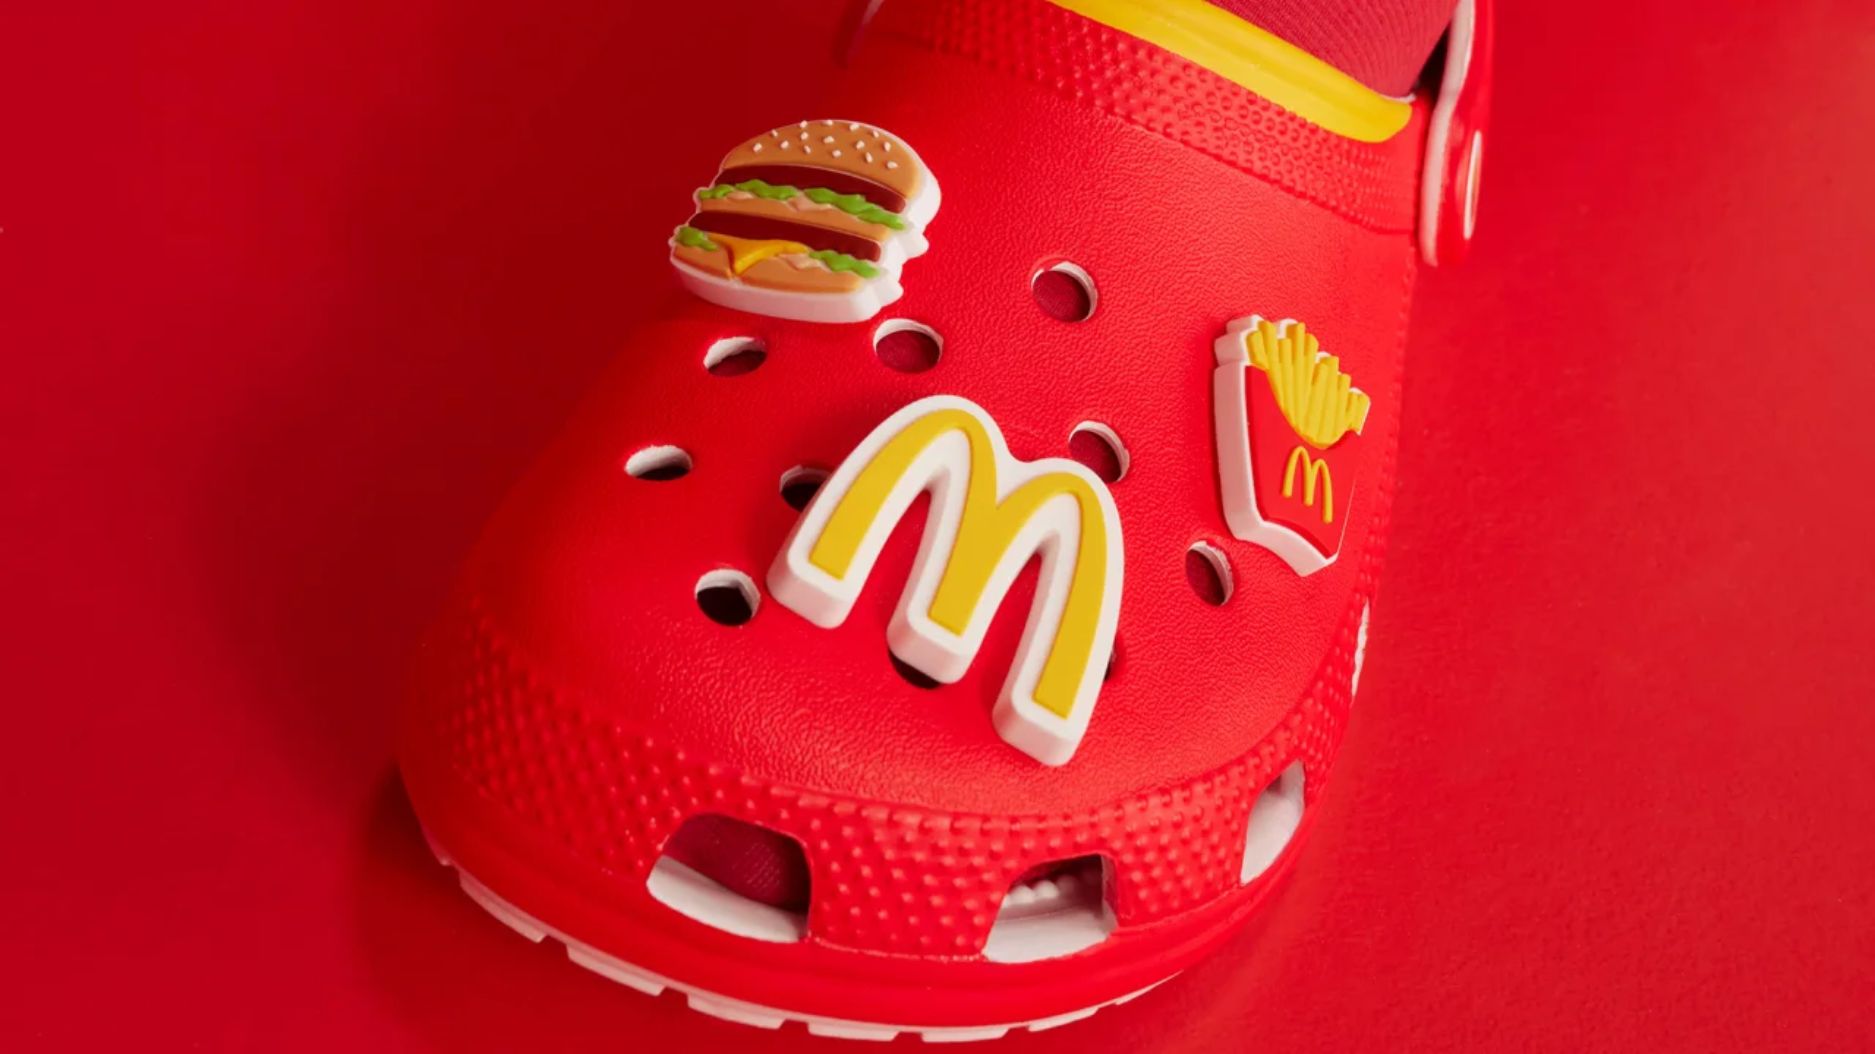 Crocs offers a collection of shoes inspired by McDonald’s